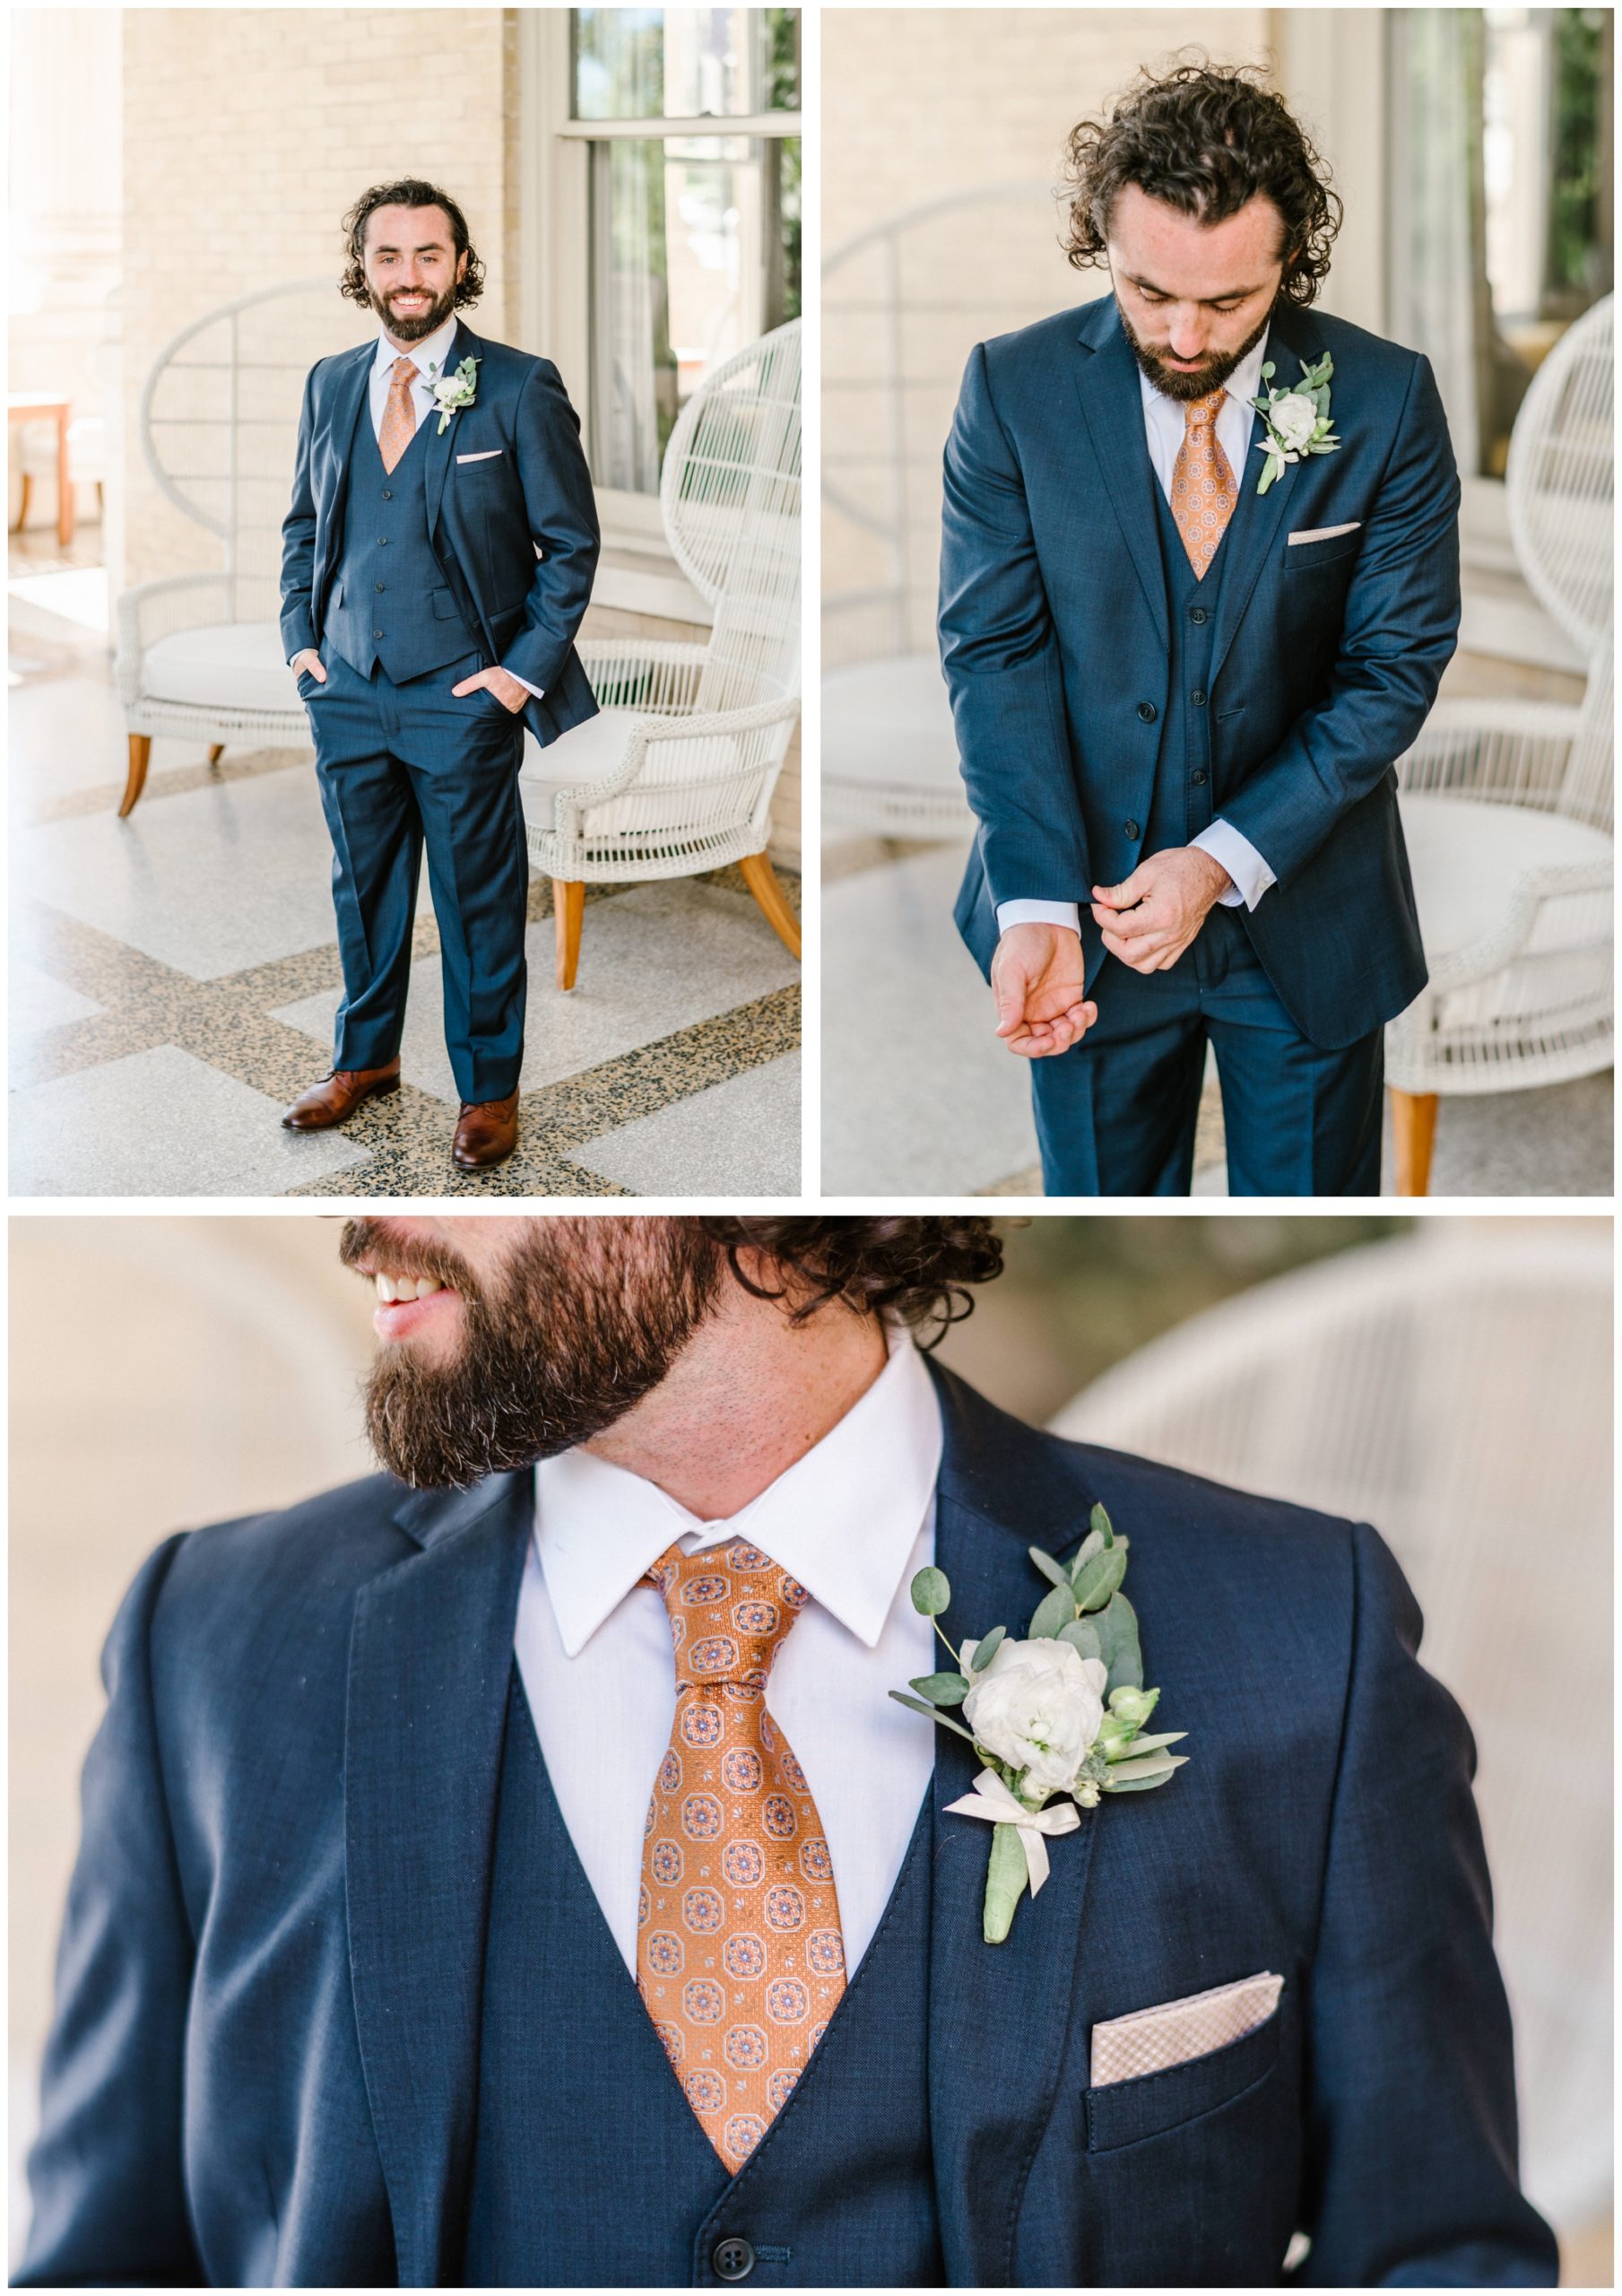 Emily and Ralph’s intimate wedding at Hotel Ella in Austin, Texas